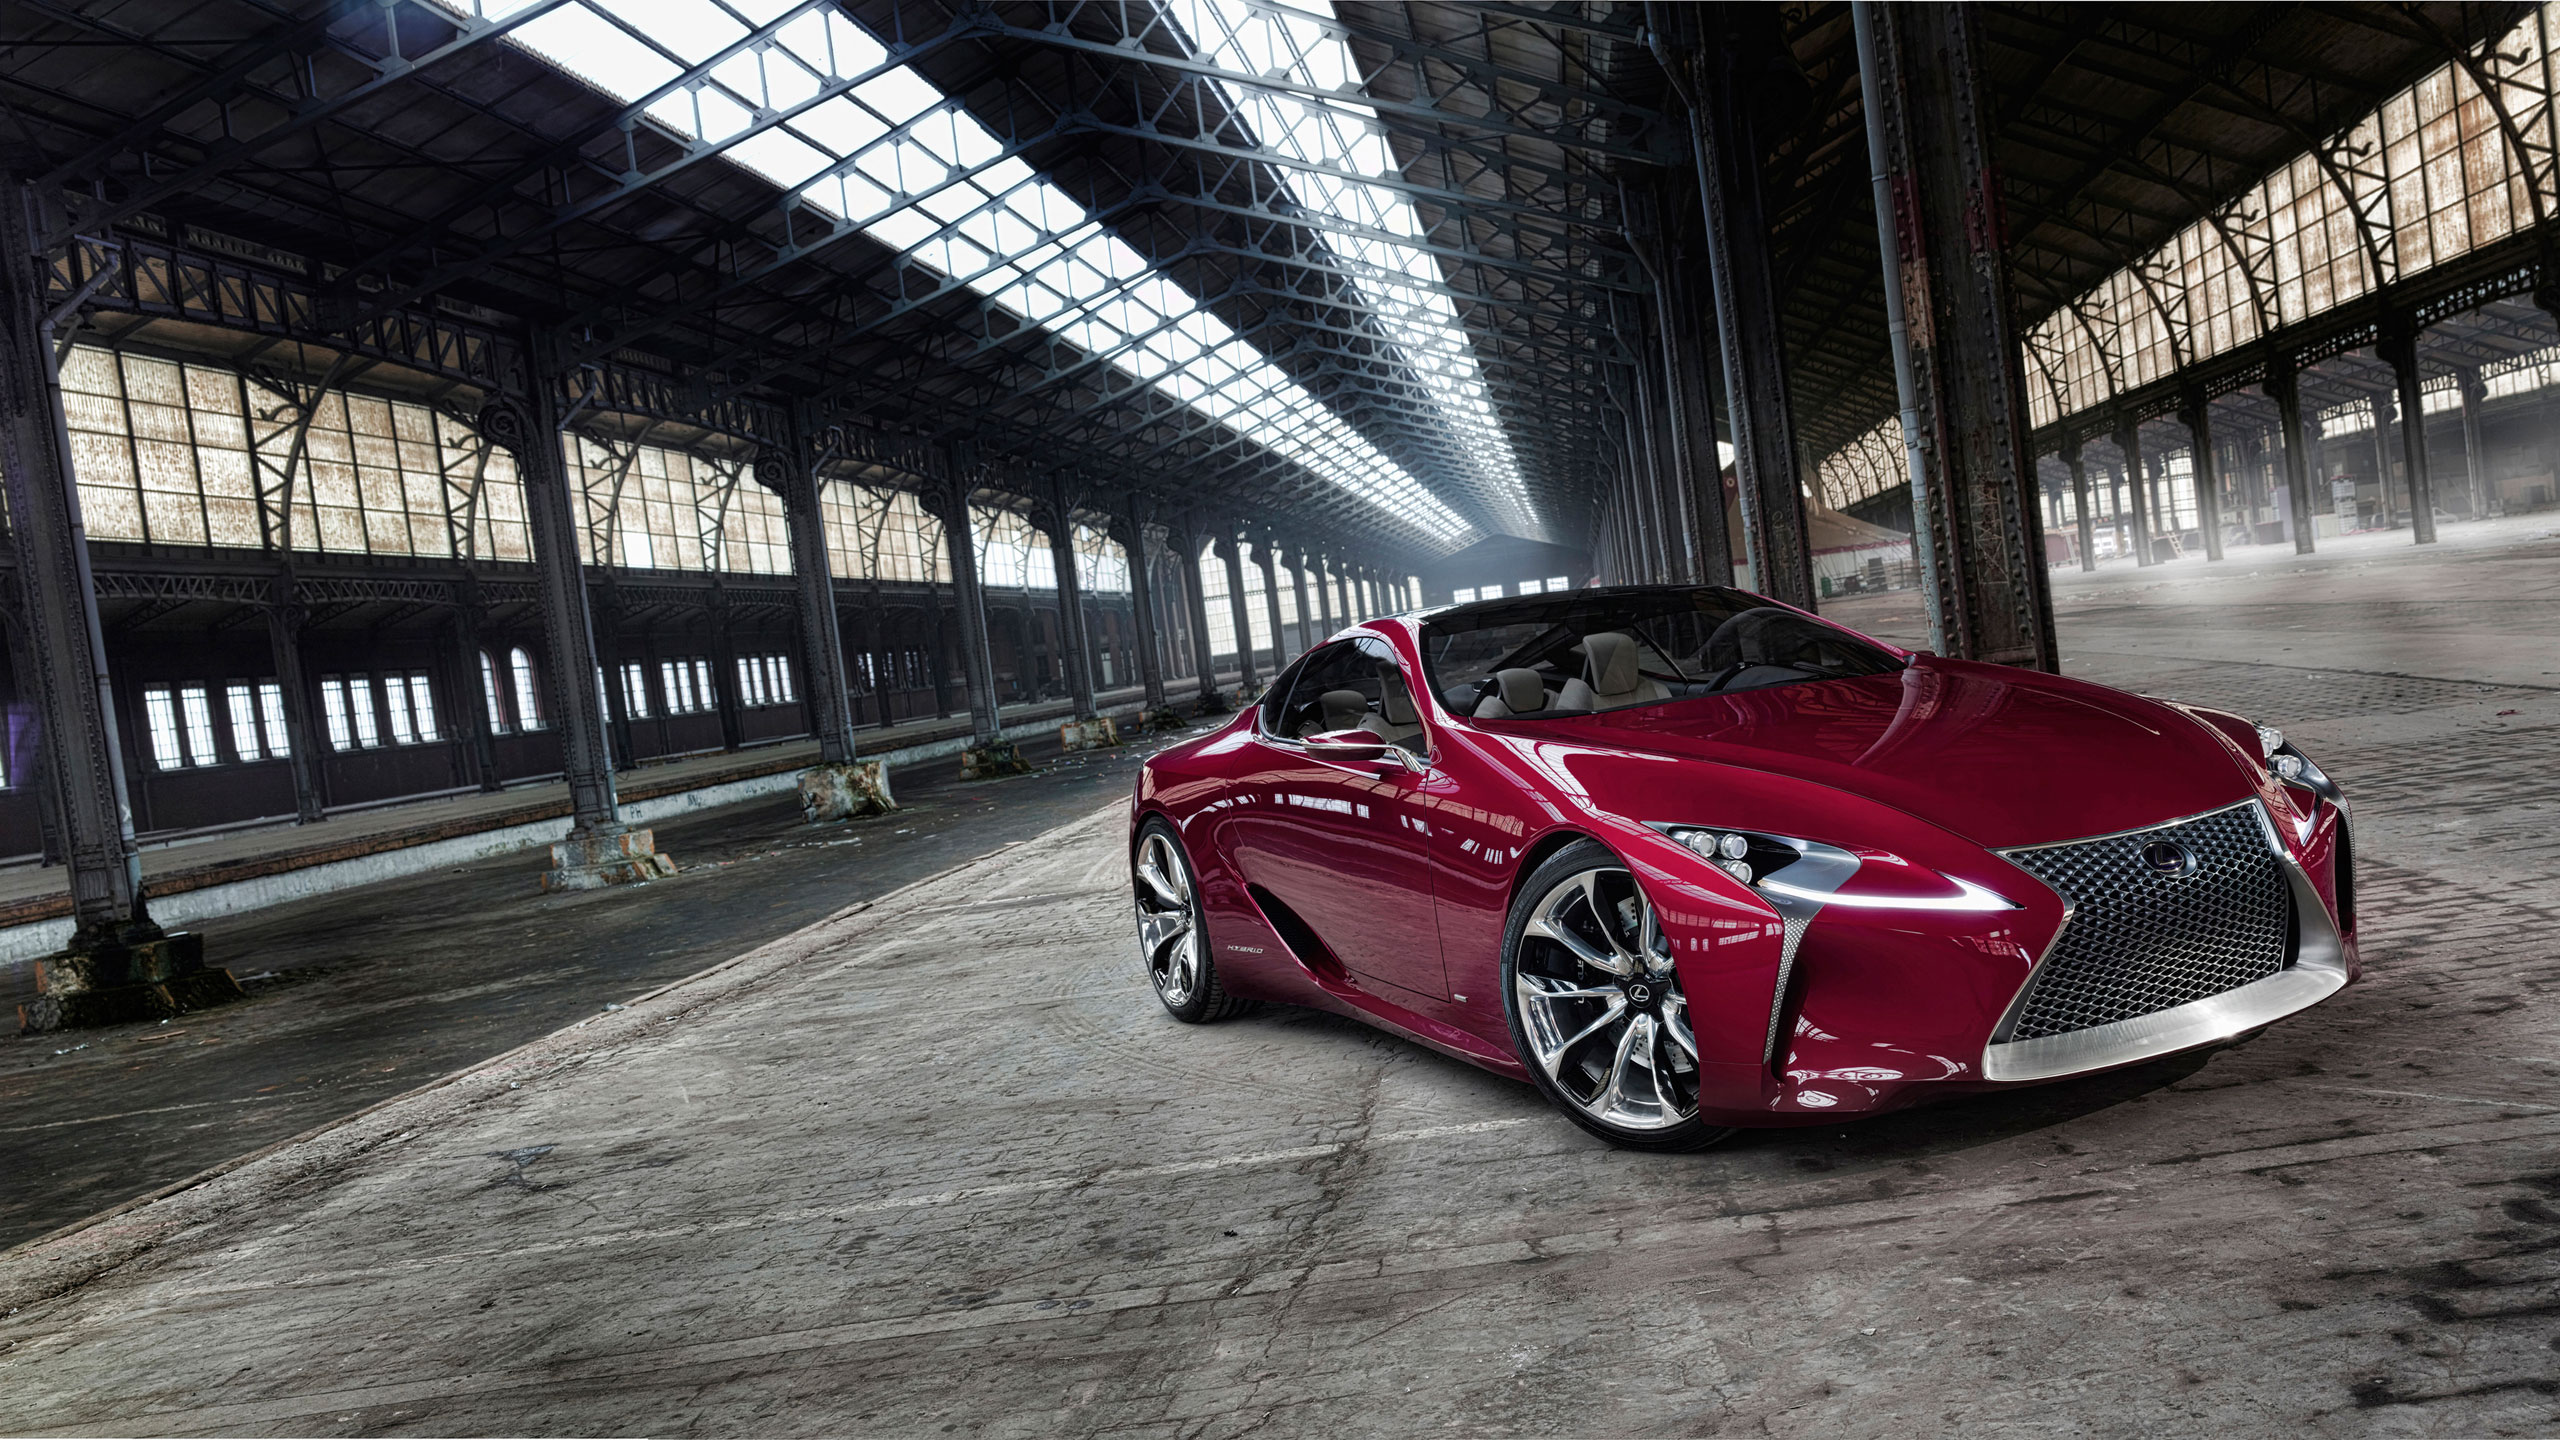 2017 Lexus LF-LC Might Pack 600+ HP in Sportier 'F' Version